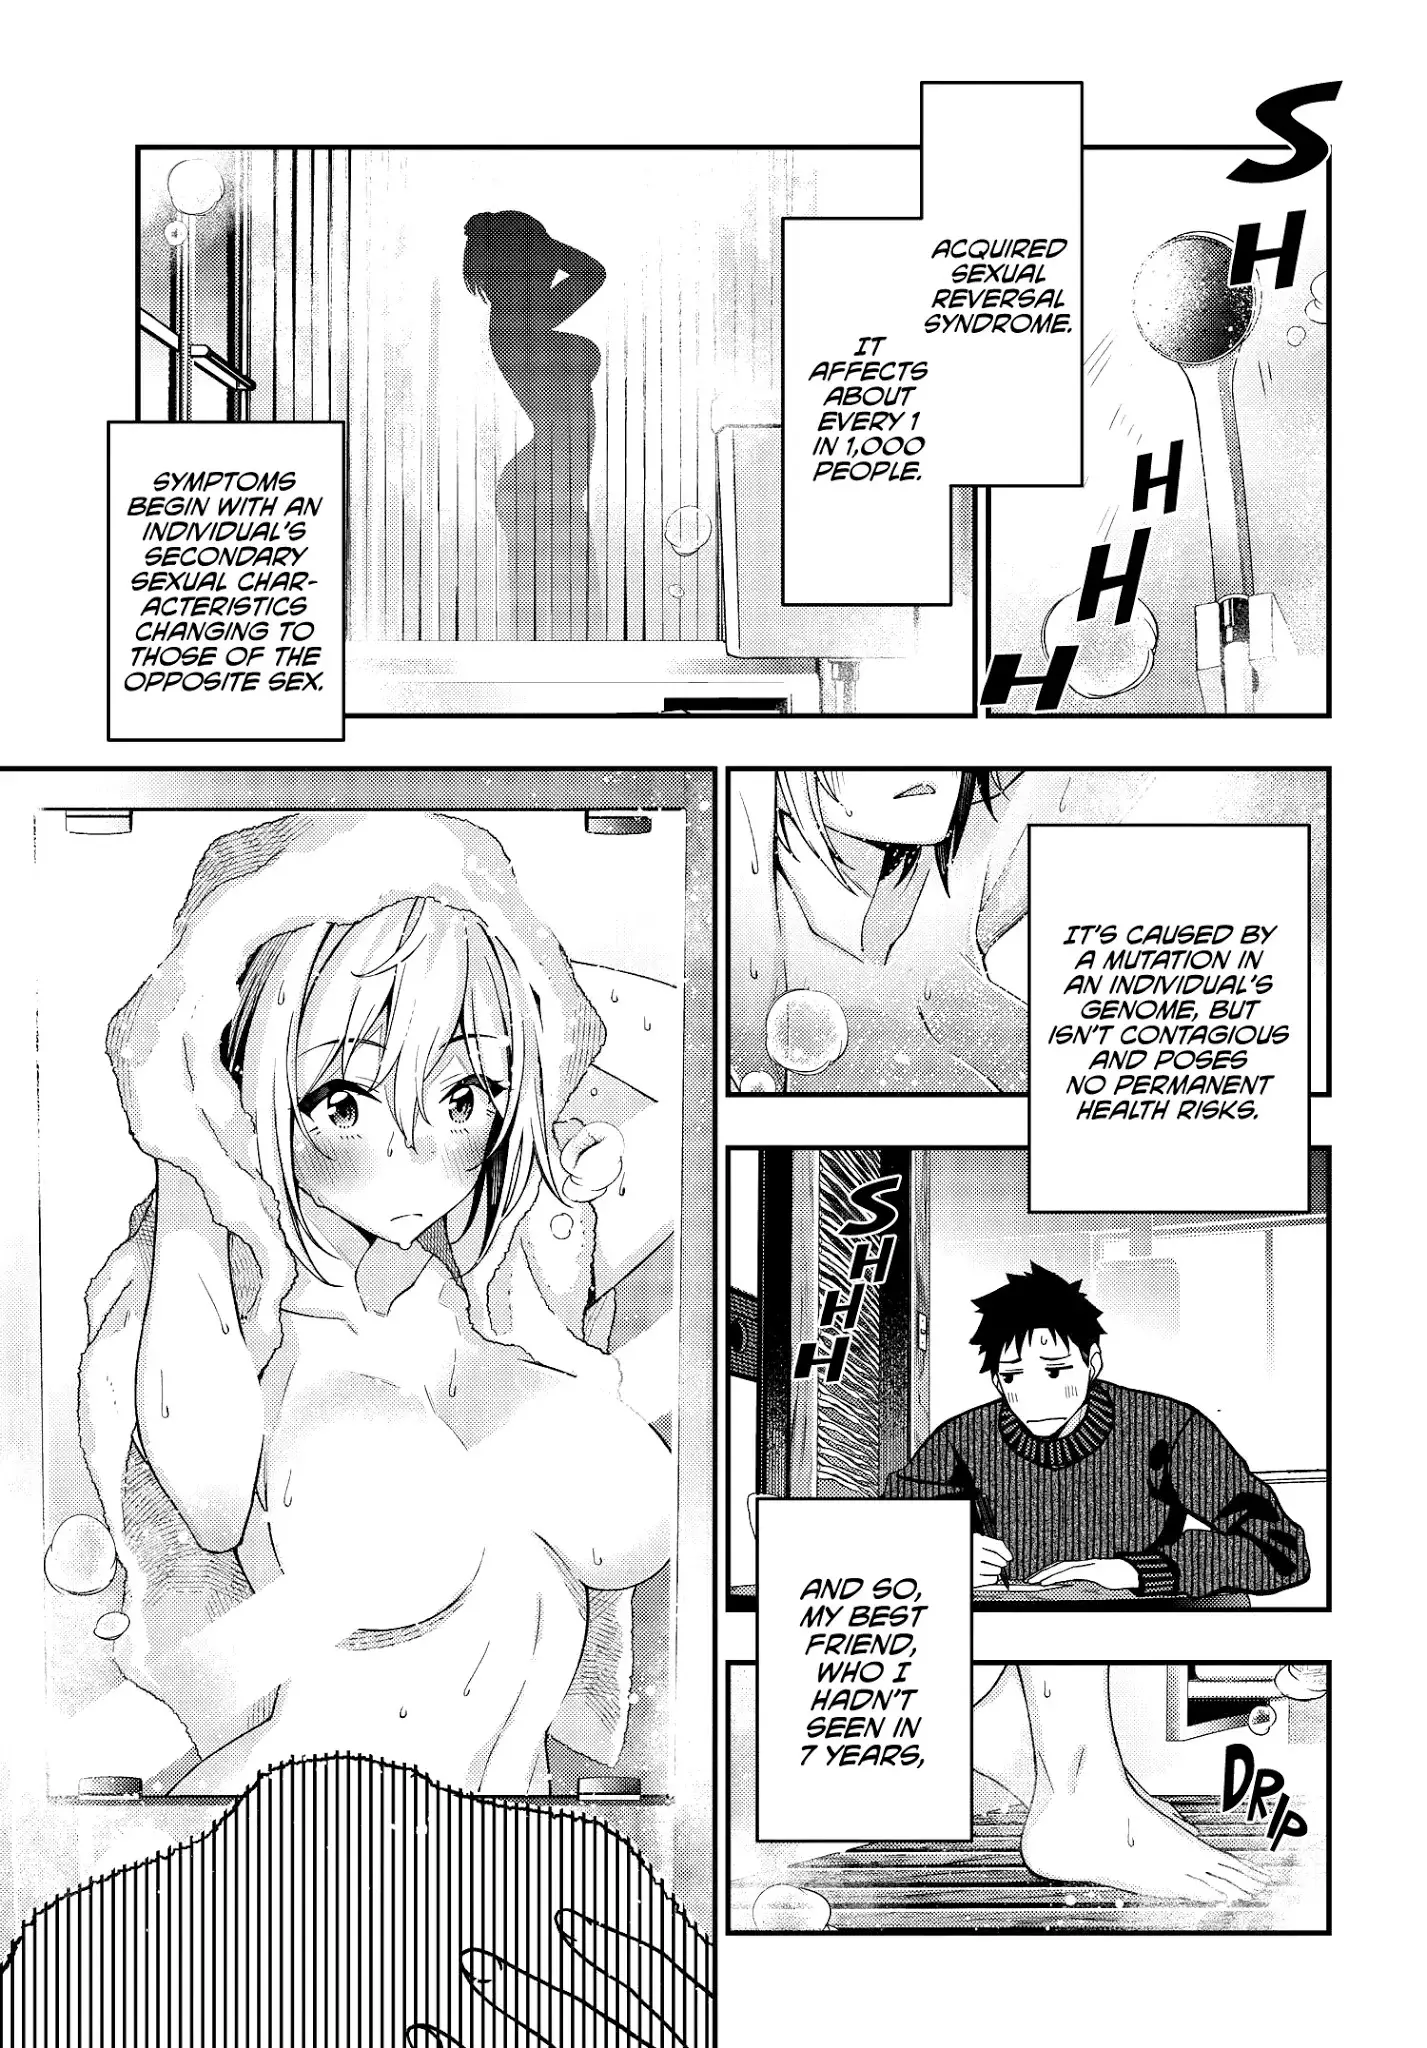 A Choice Of Boyfriend And Girlfriend - 3 page 5